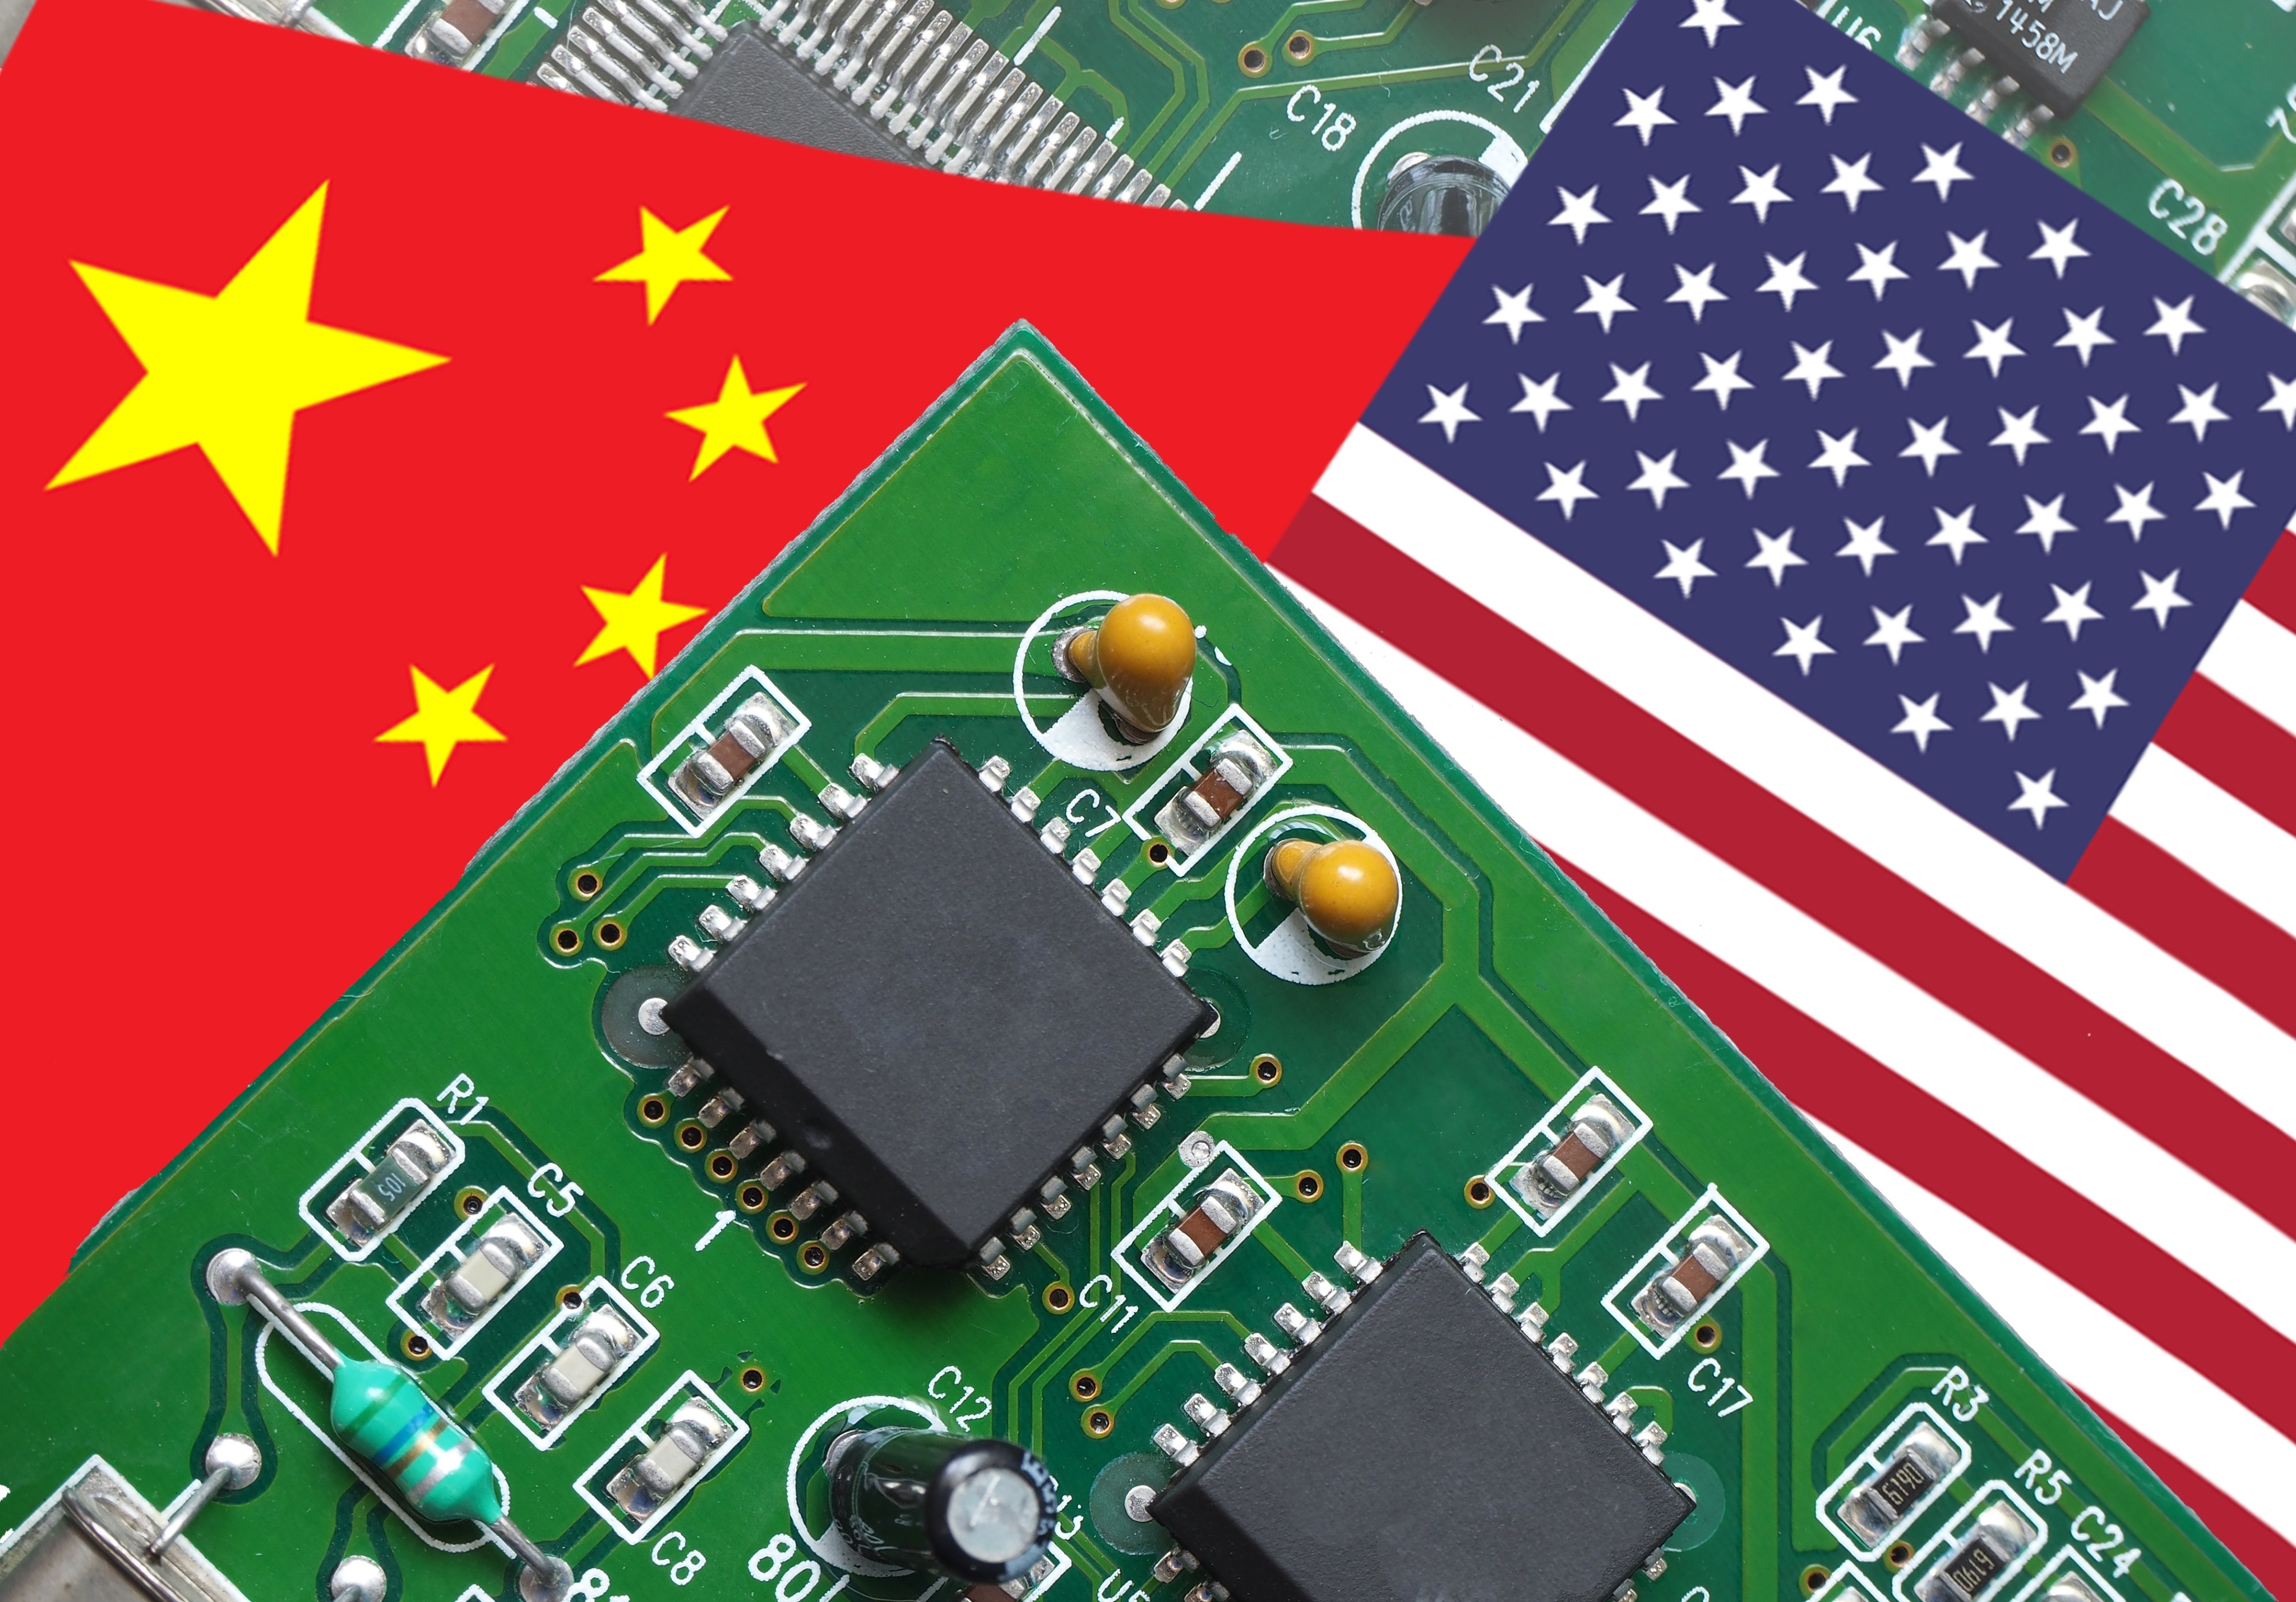 The Biden administration’s new executive order restricting US investment in China’s semiconductors, quantum computing and artificial intelligence sectors underscore the escalating tensions between Beijing and Washington. Image: Shutterstock